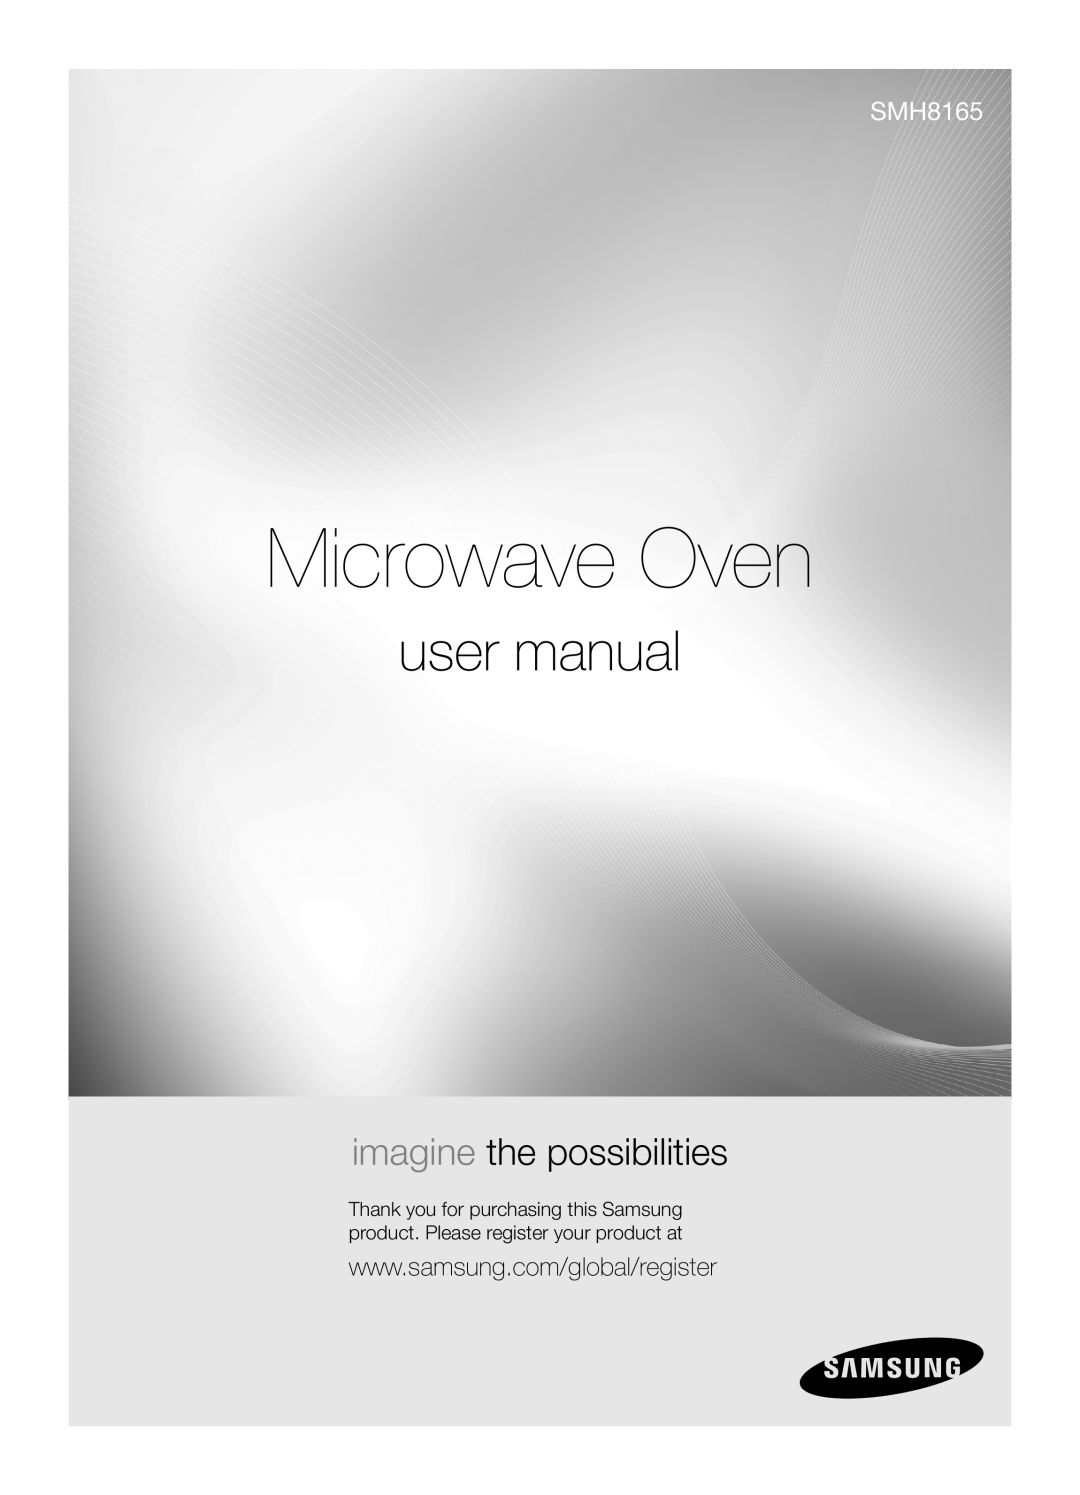 Samsung SMH8165STG user manual Microwave Oven, imagine the possibilities 